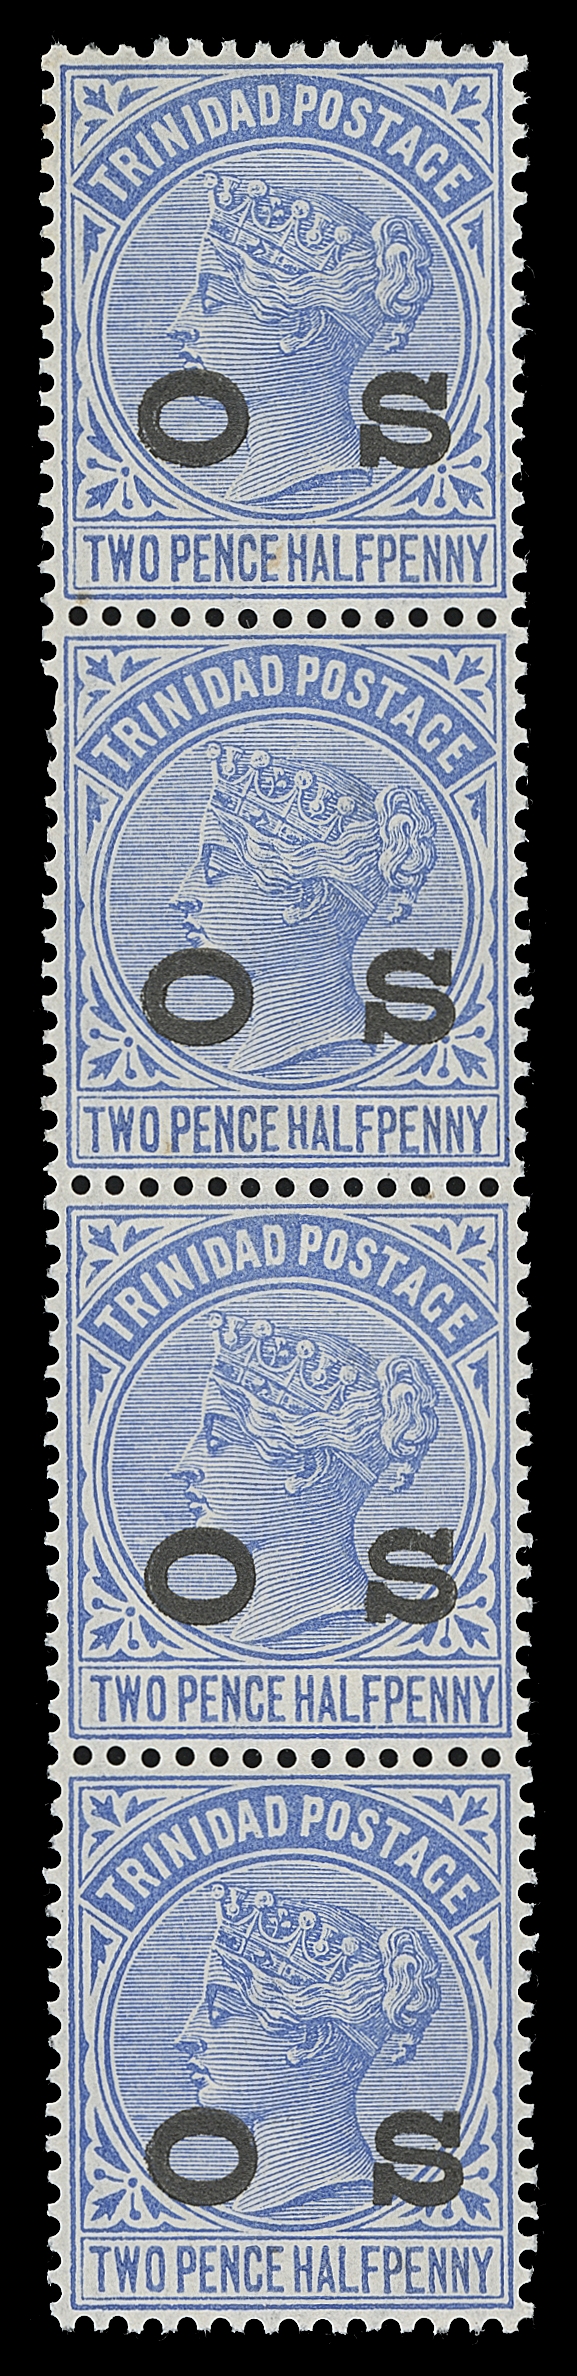 TRINIDAD  O1-O7,Large Official Service "O S" overprint in black, the set of seven in mint vertical strips of four, each with one or two stamps NH; one 6p with fault at foot and 5sh with minor toning on some perfs. A spectacular set believed to be the LARGEST MULTIPLES EXTANT, F-VF (SG O1-O7)